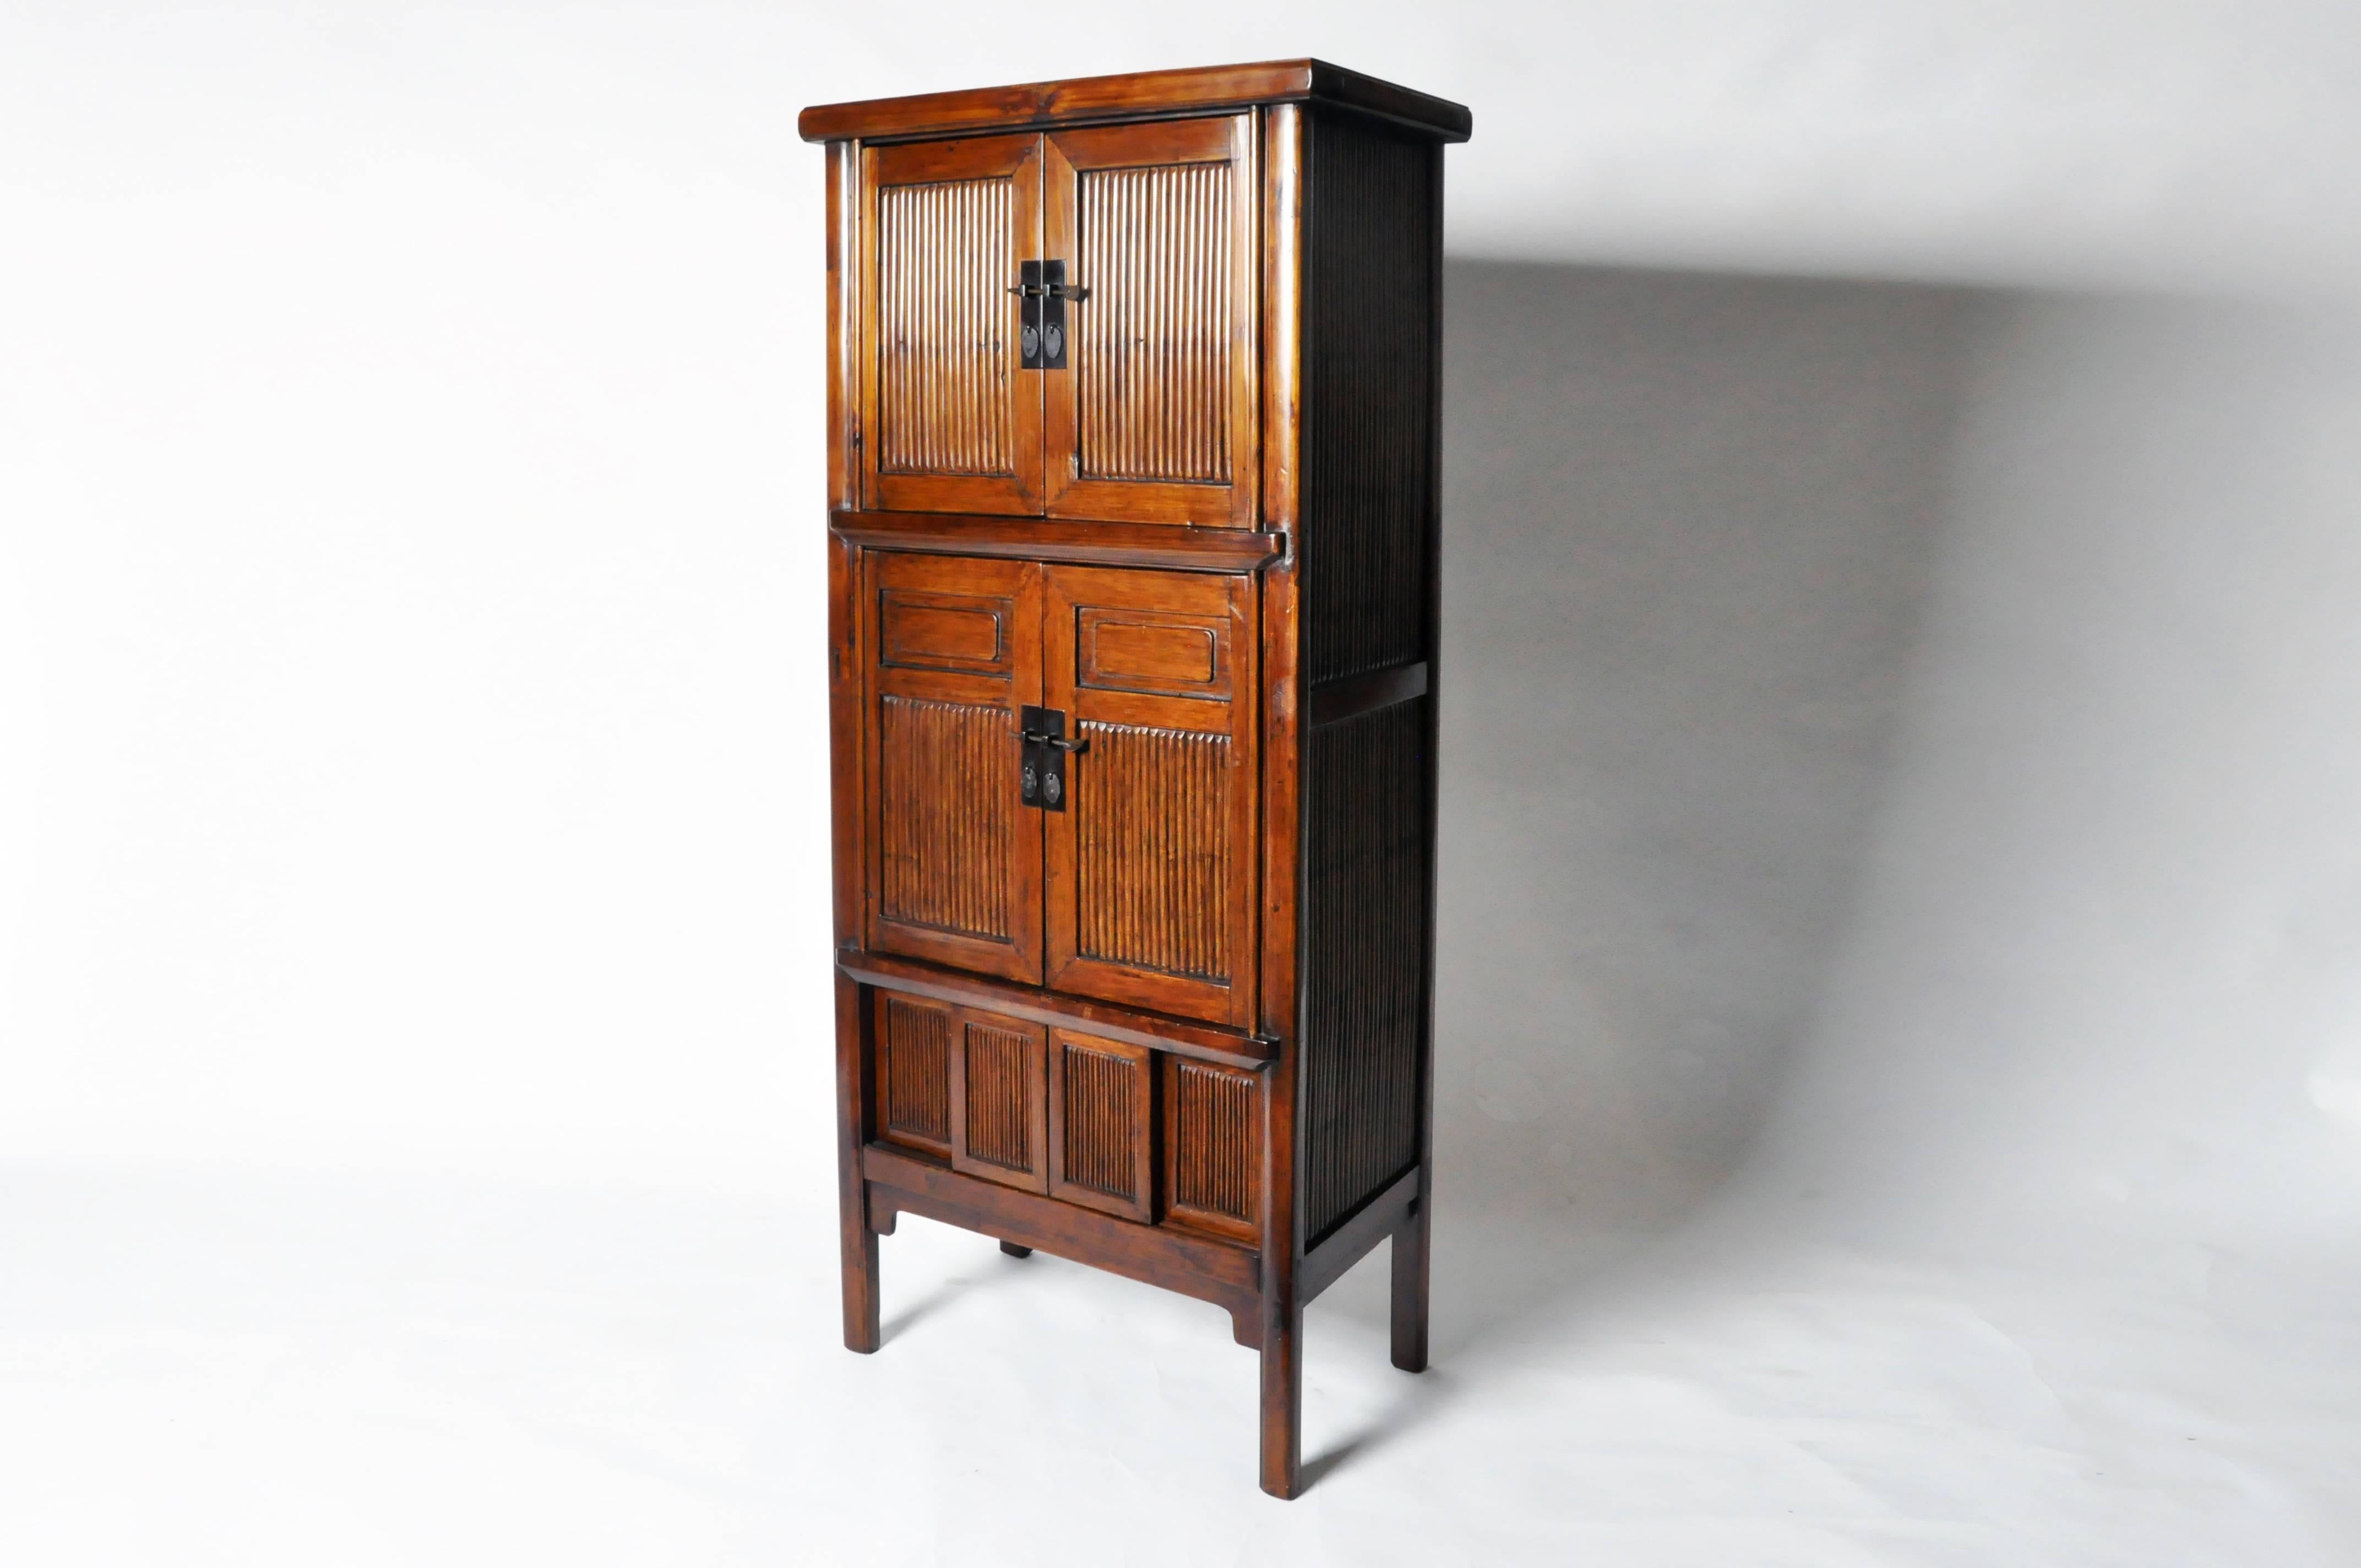 Also referred to as a sloping-style cabinet, the A-frame Silhouette is often considered to be one of the most beautiful and aesthetically pleasing forms of Chinese furniture. Splayed legs create upward movement through the gently angled body, which